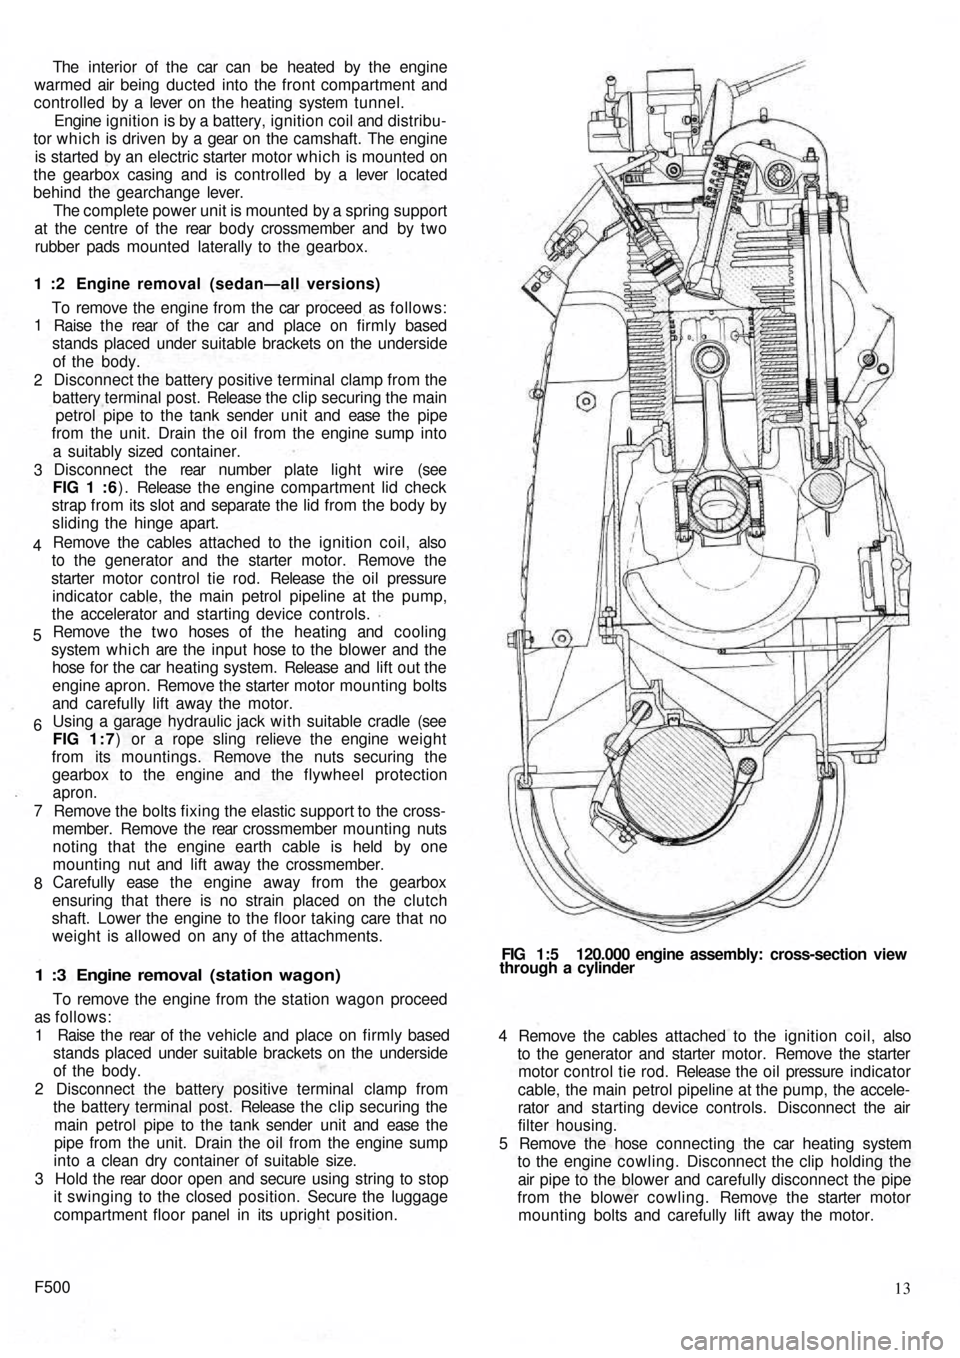 FIAT 500 1958 1.G Workshop Manual The  interior of the  car can  be heated by the engine
warmed air being ducted into the front compartment and
controlled  by a  lever on the heating system tunnel.
Engine ignition is by a battery, ign